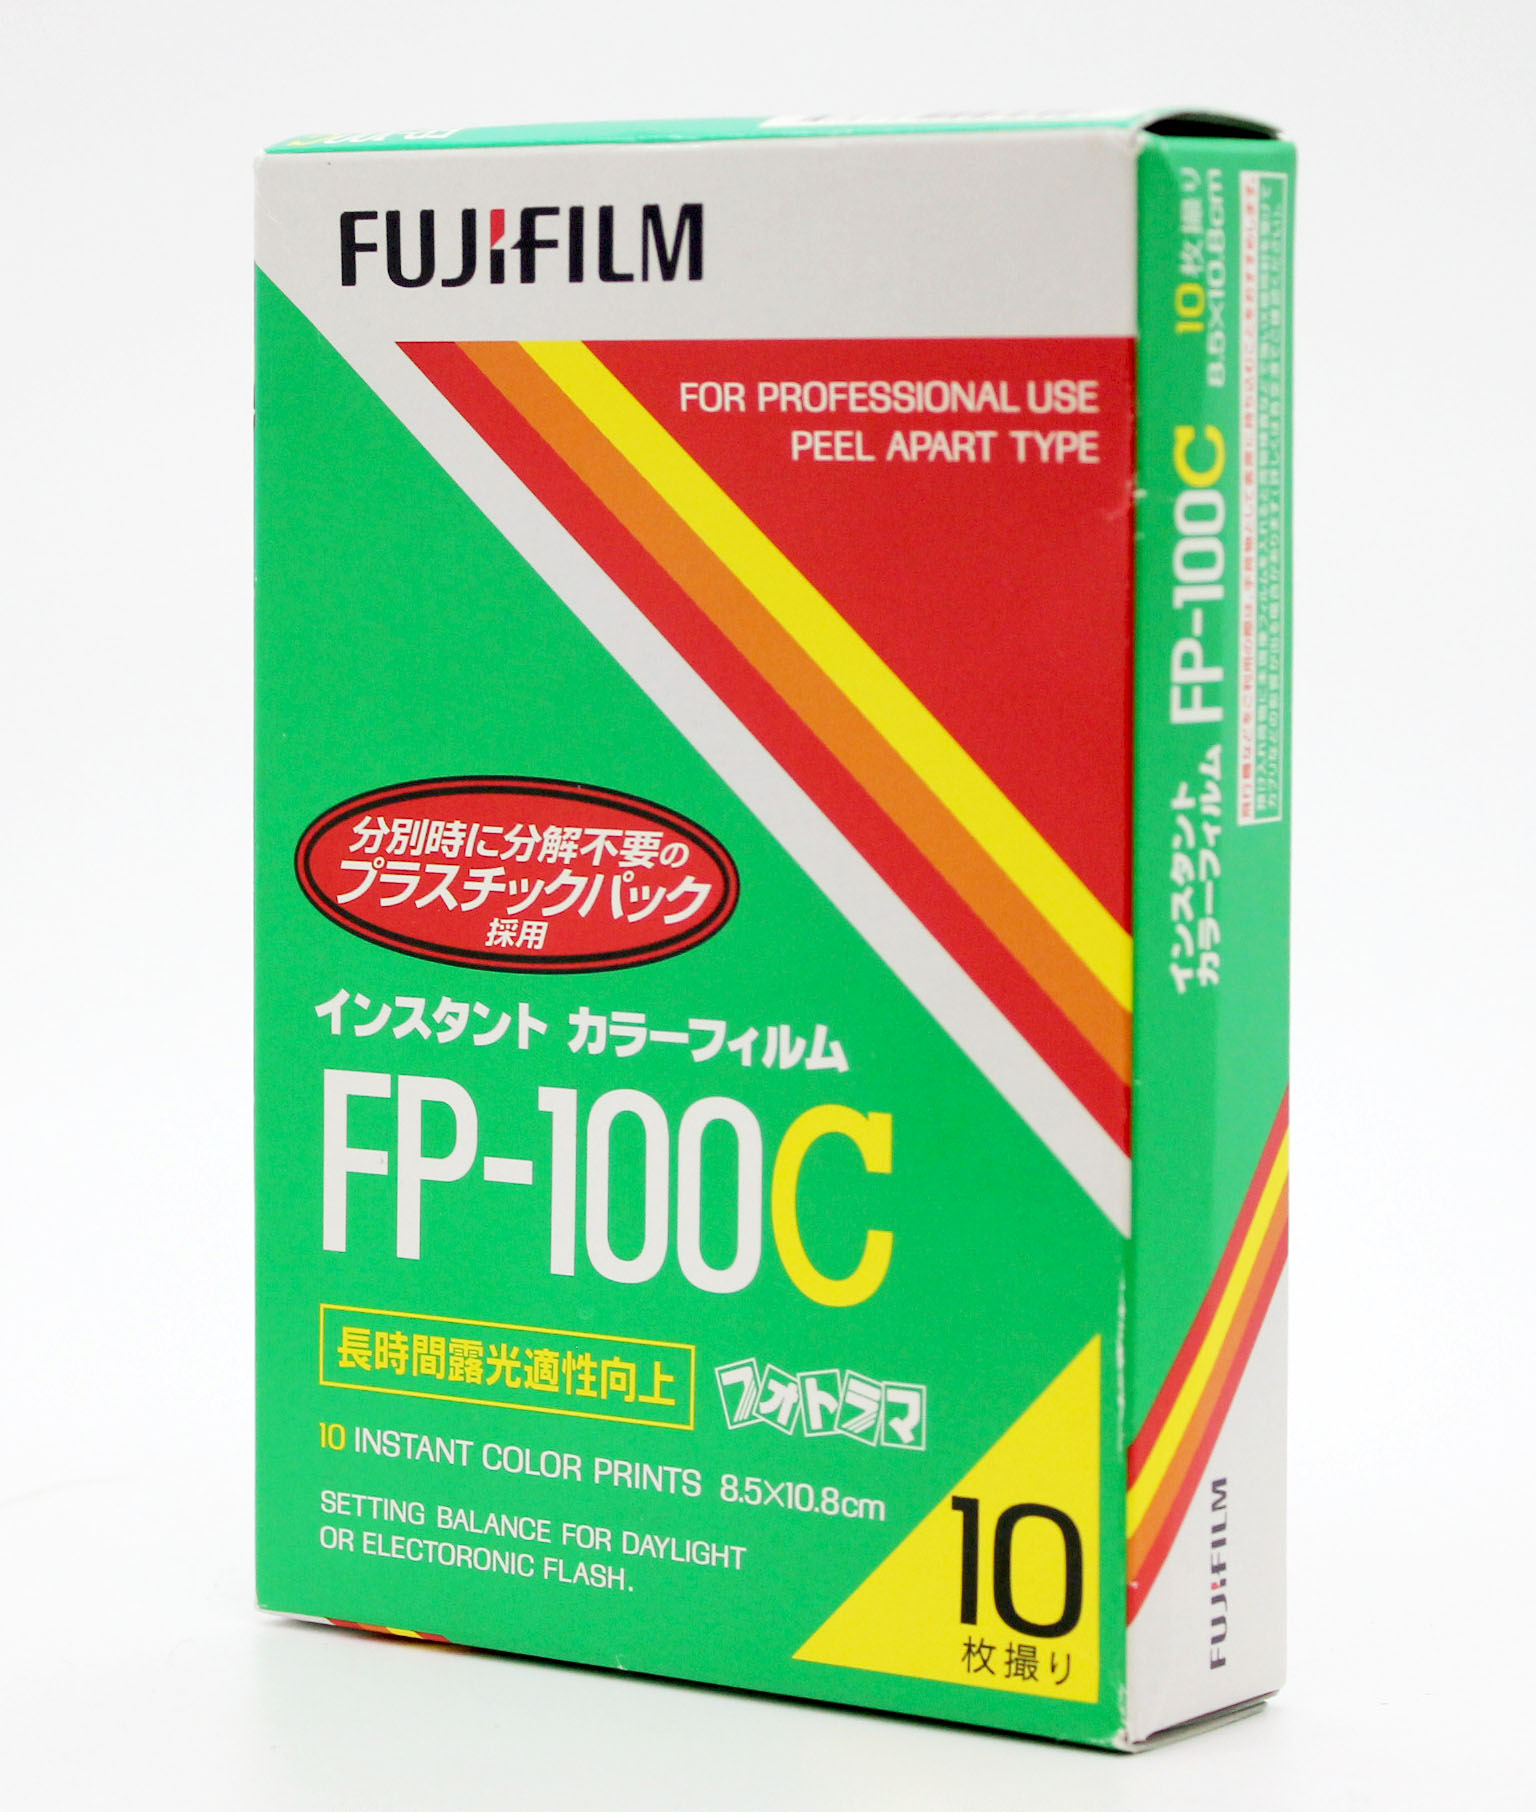 Japan Used Camera Shop | [New] Fujifilm FP-100C Professional Instant Color Film Expired 11/2017 from Japan